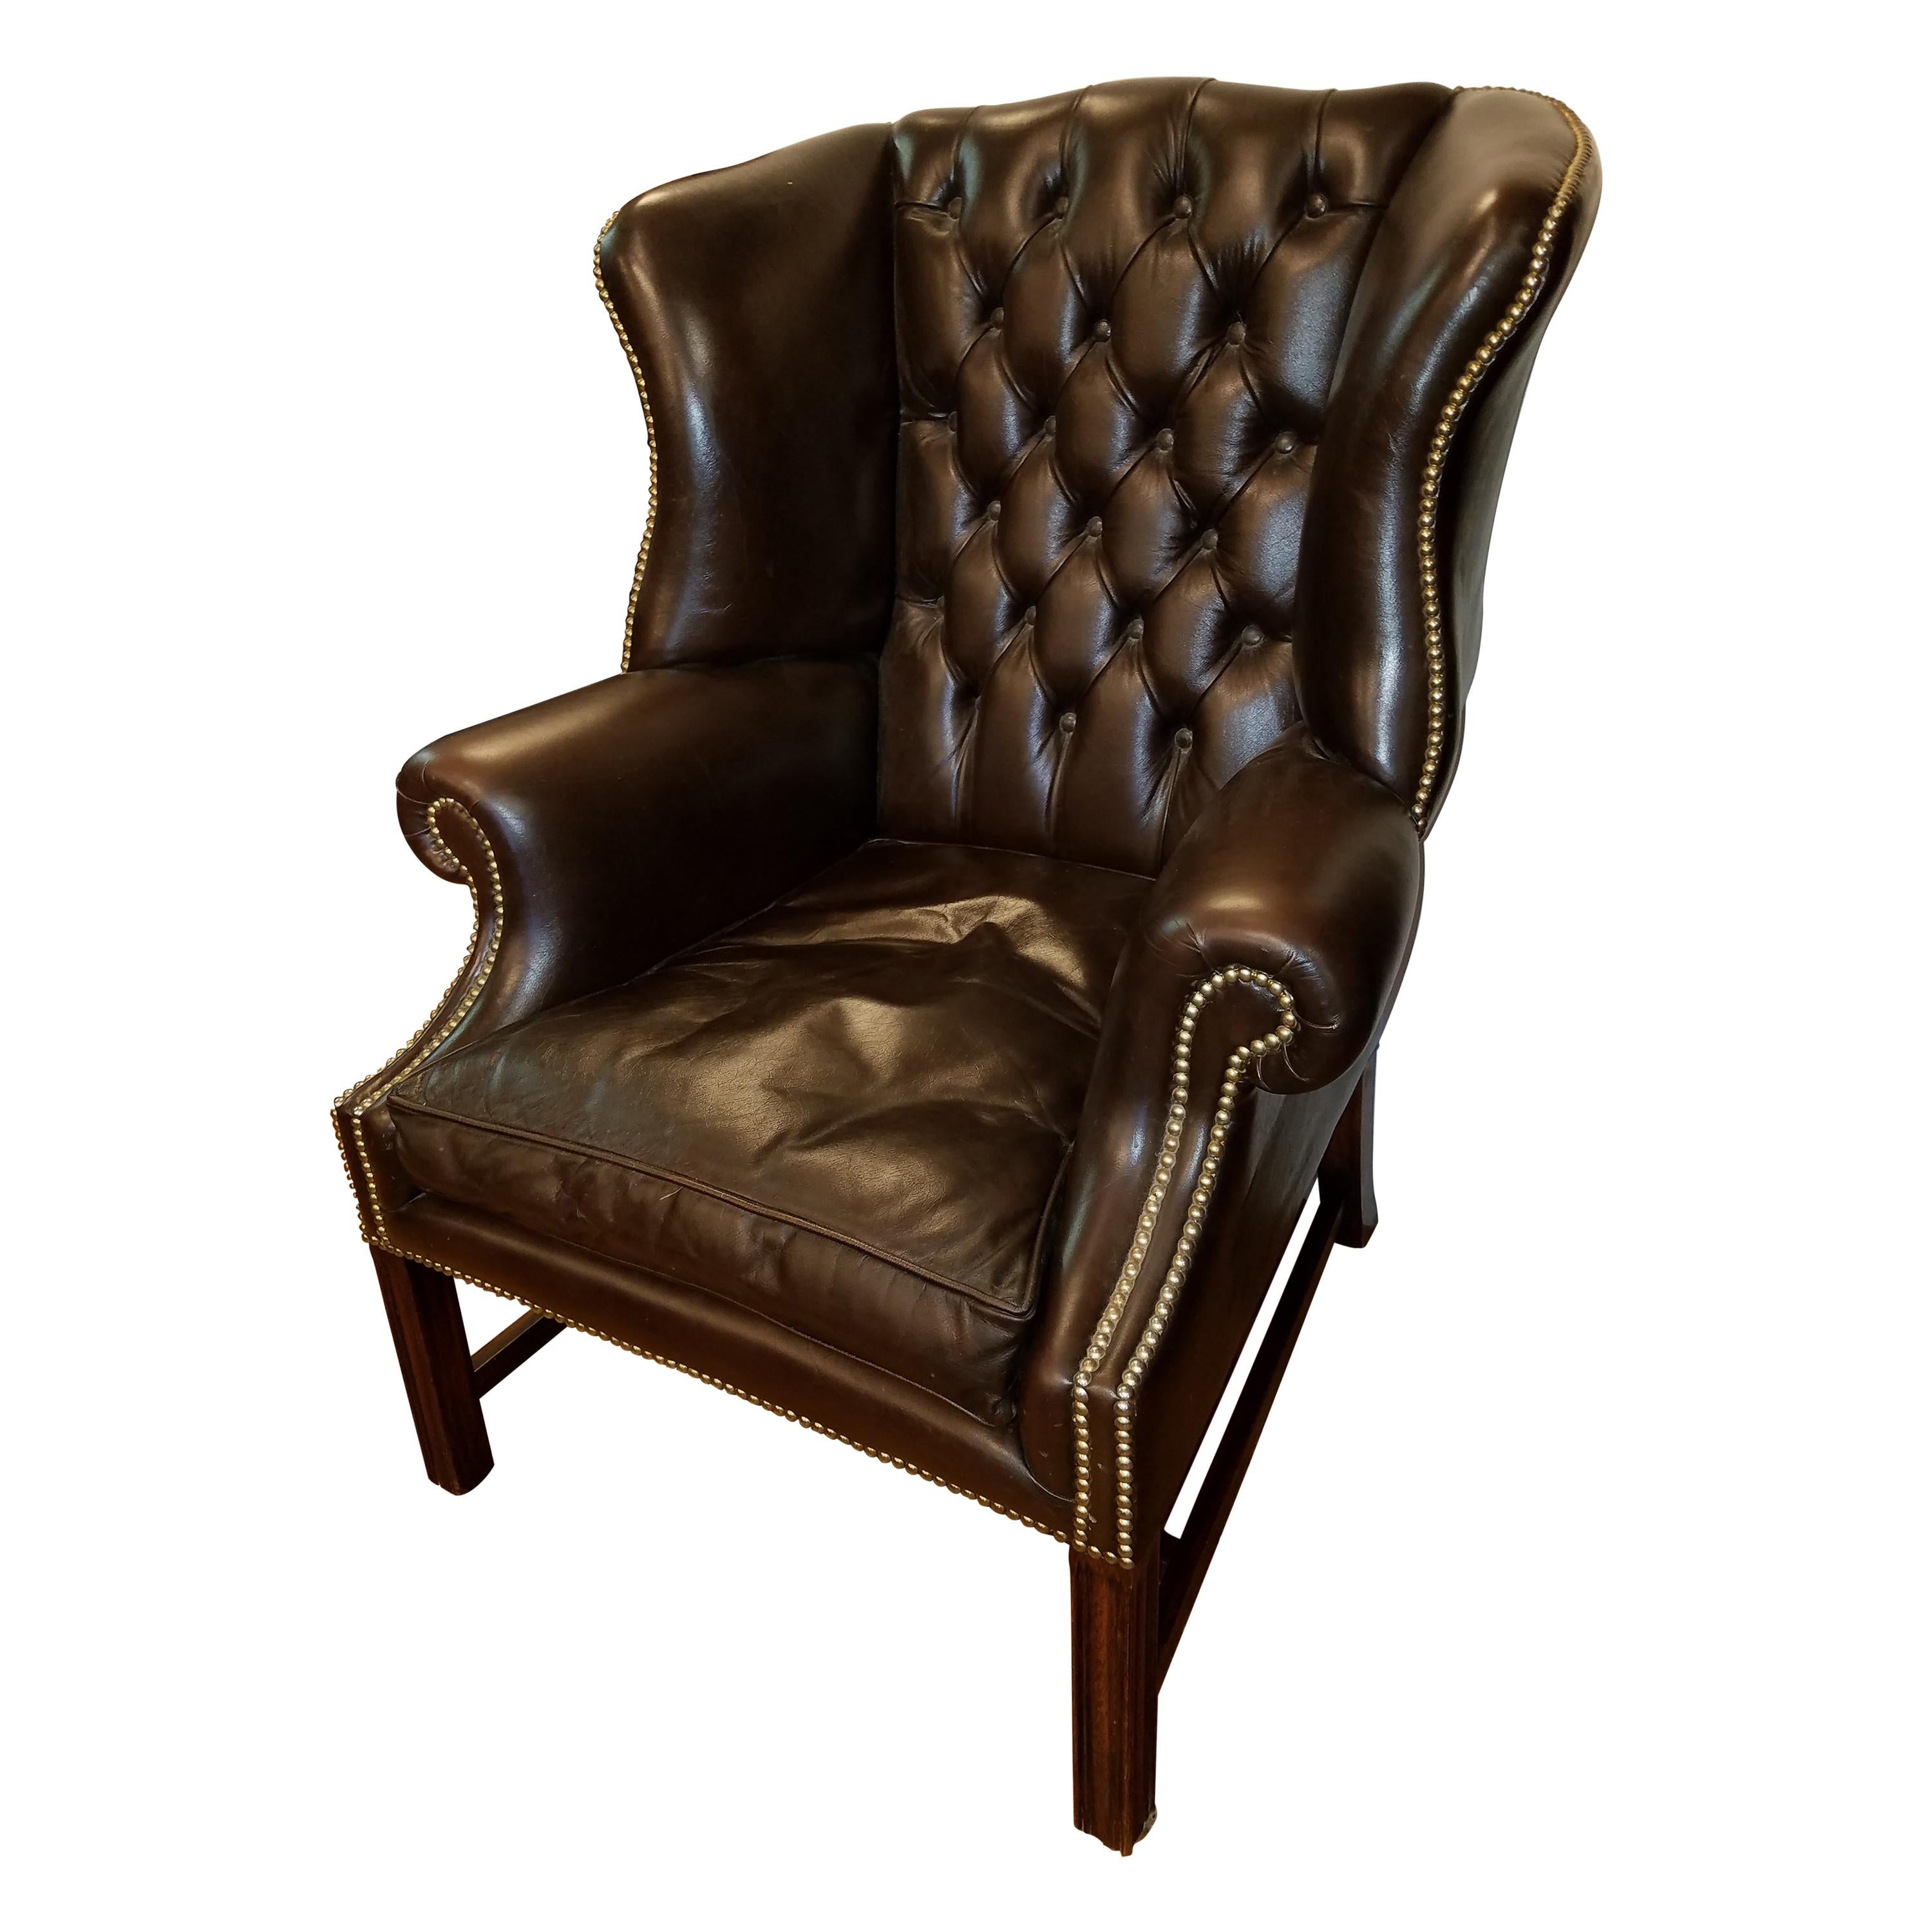 English Leather Wingback Chair with Nailhead Trim